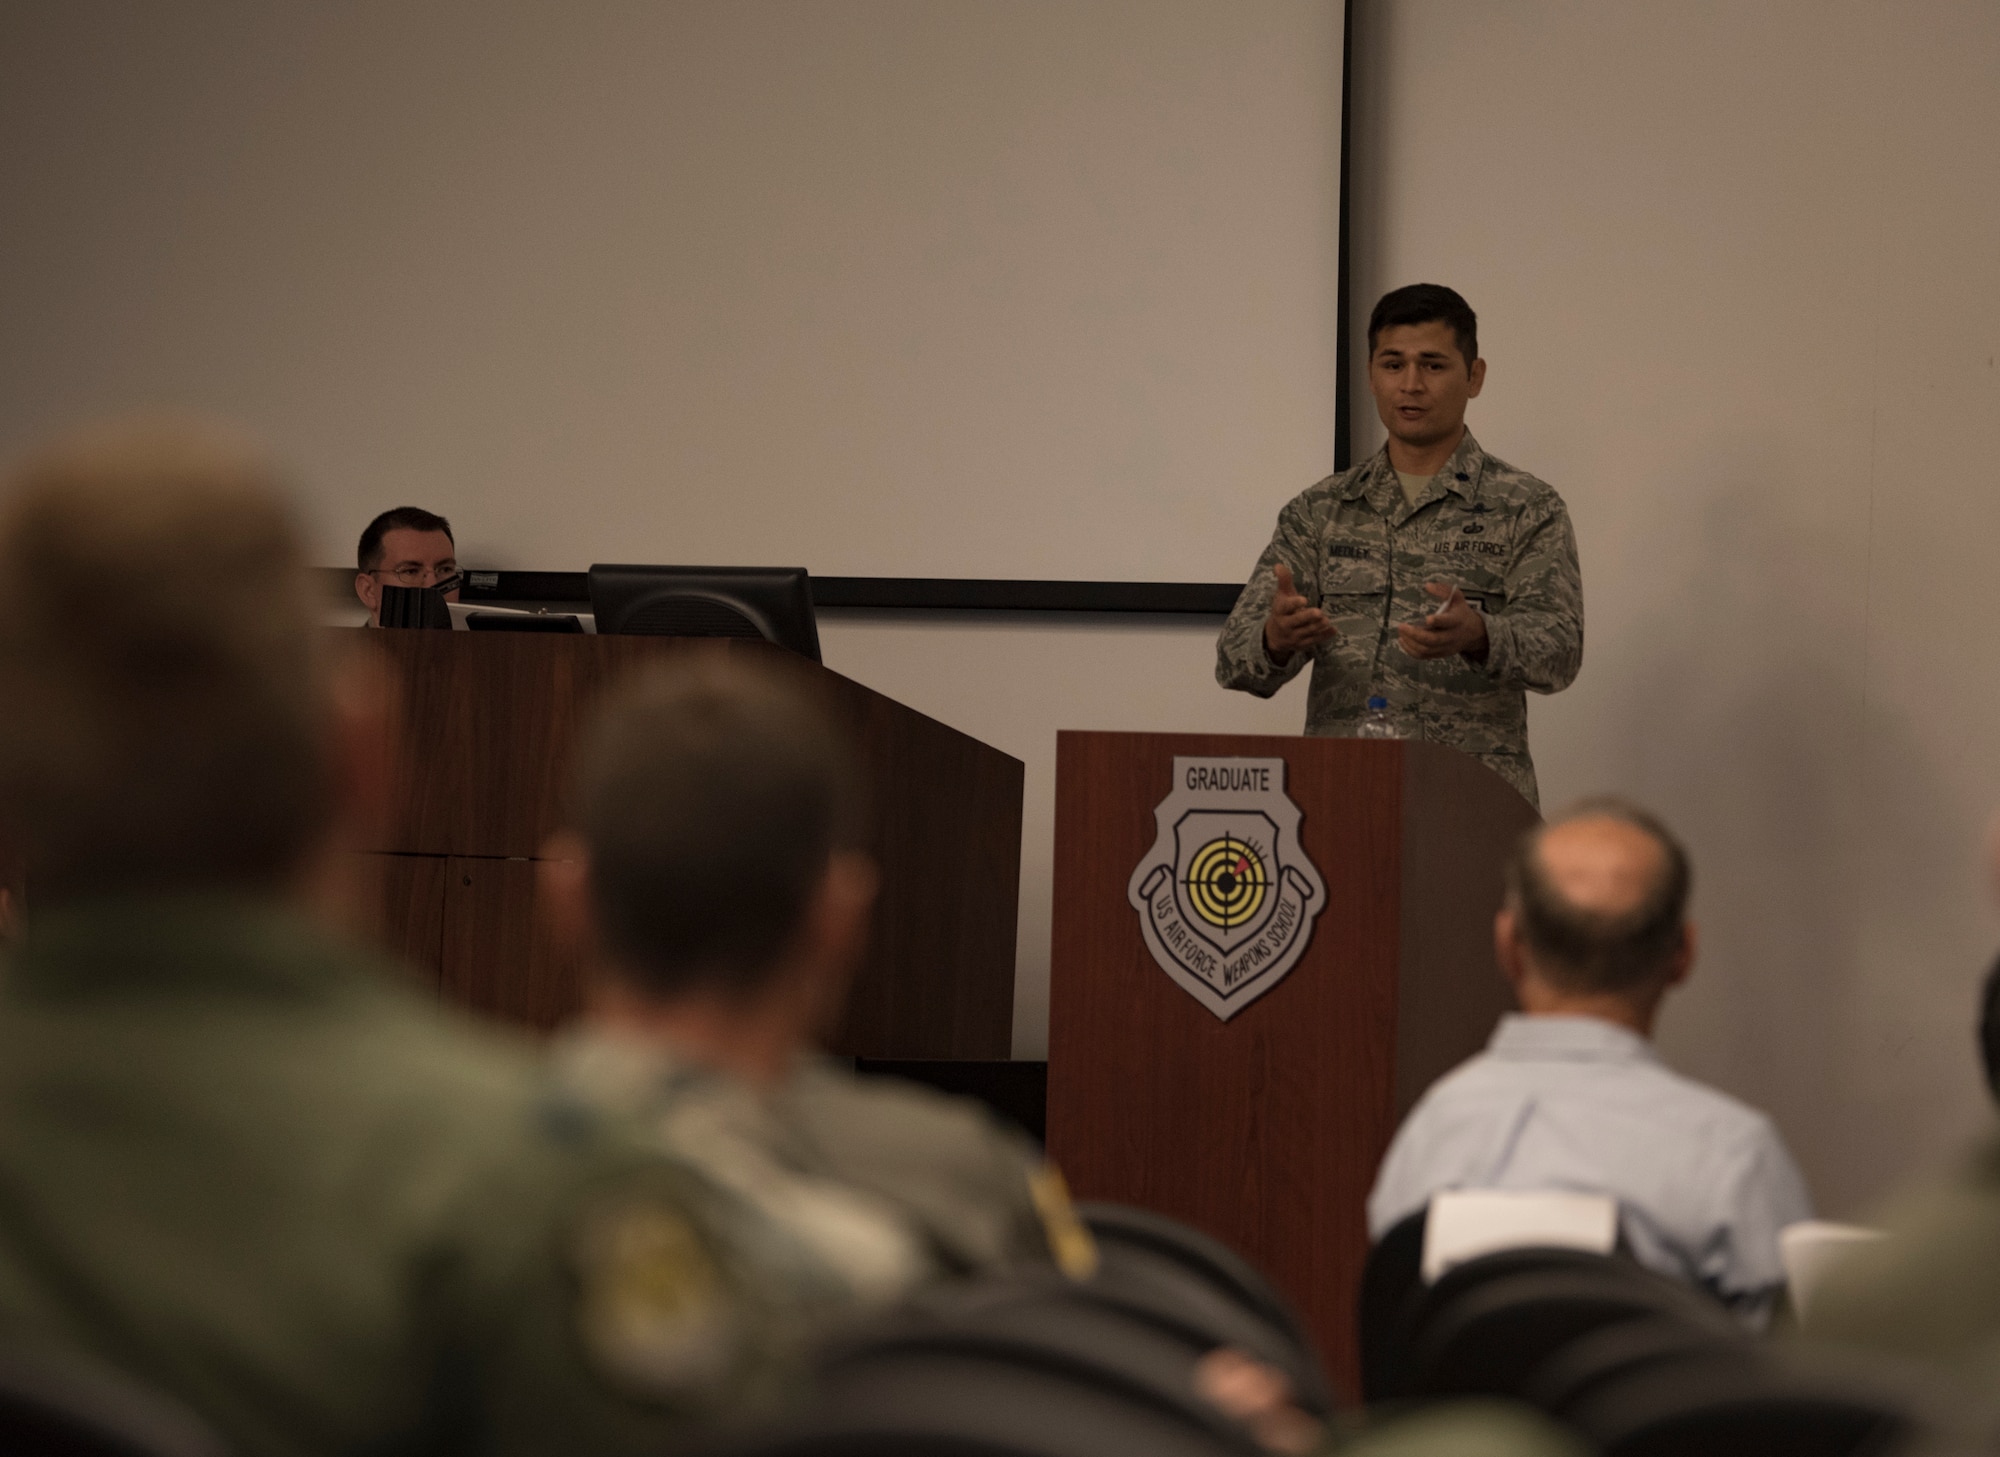 Lt. Col. Douglas Medley, 32nd Weapons Squadron commander, gives a speech during an assumption of command ceremony at Nellis Air Force Base, Nevada, June 28, 2018. Medley graduated from the U.S. Air Force Weapons School in 2012 and is returning as the 32nd WPS squadron commander, focusing on Cyber Warfare Operations Weapons Instructor Course. (U.S. Air Force photo by Airman 1st Class Andrew D. Sarver)